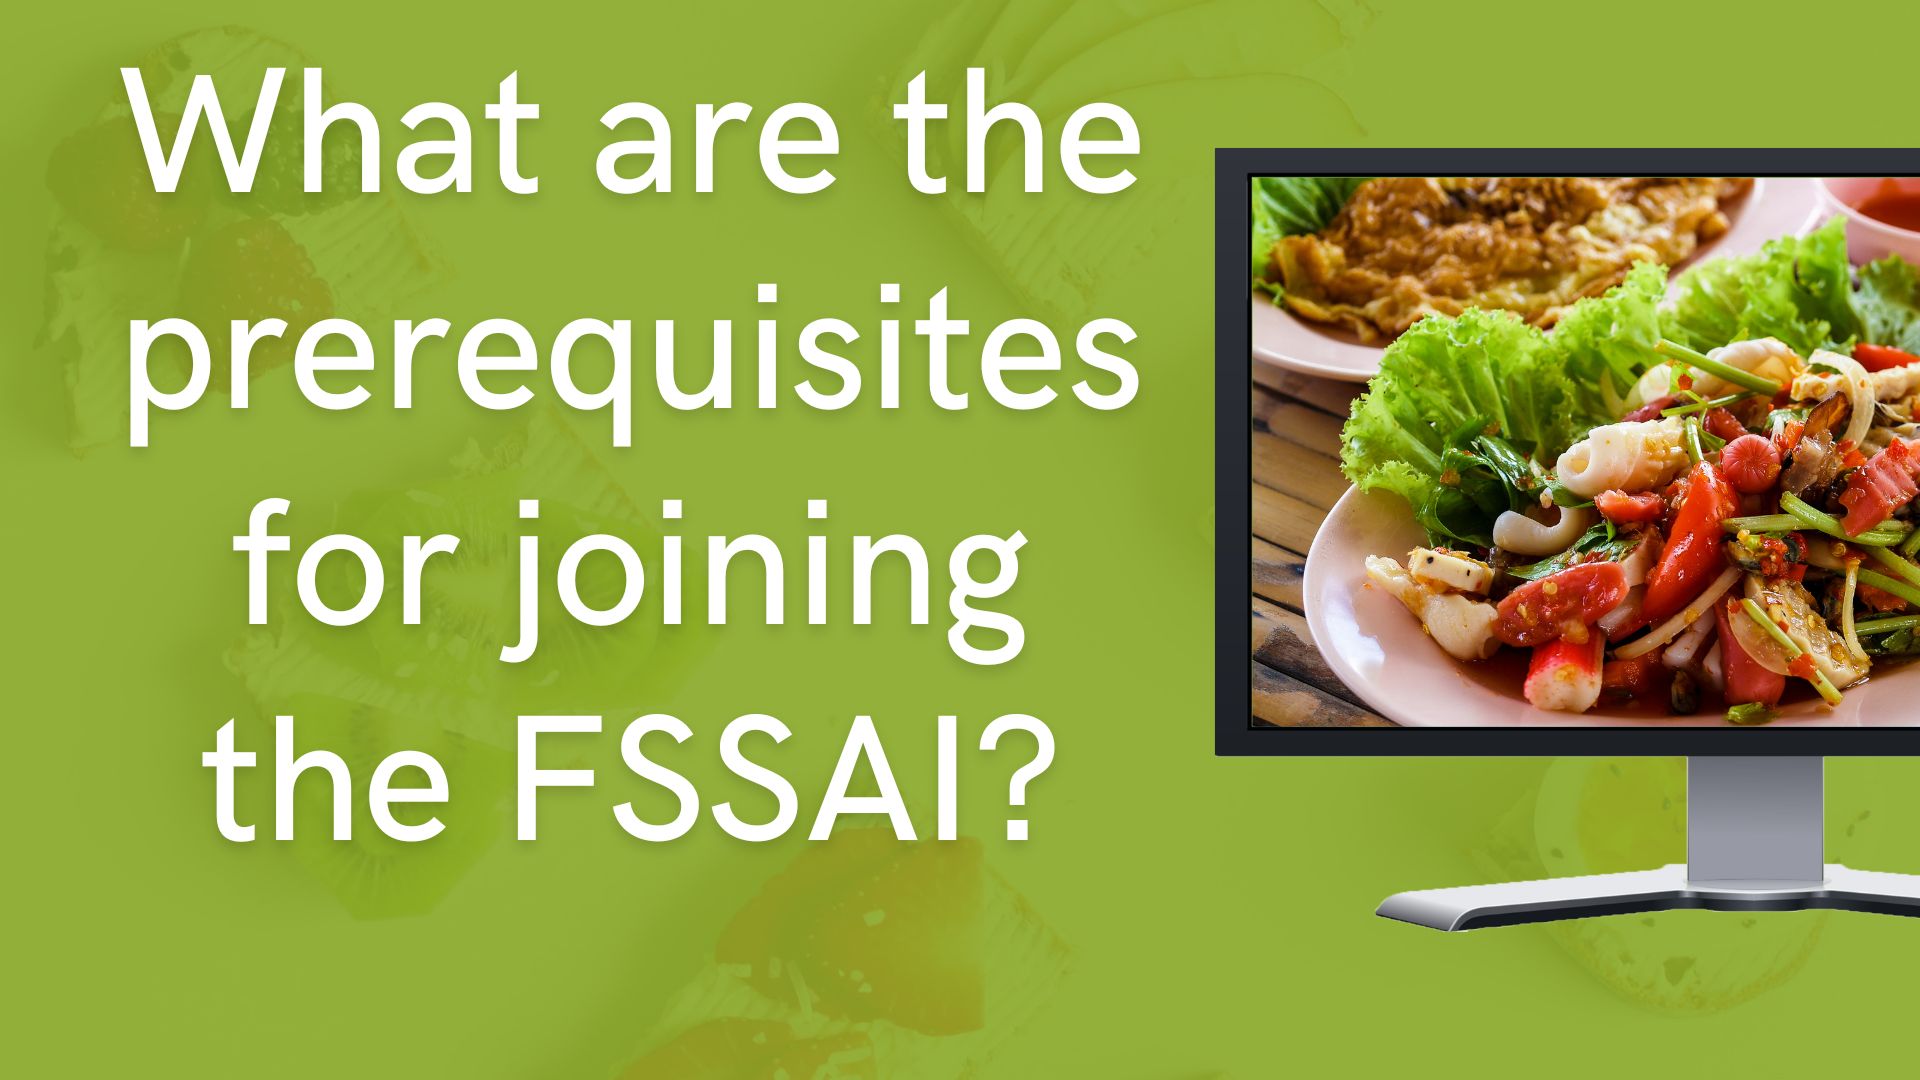 What are the prerequisites for joining the FSSAI